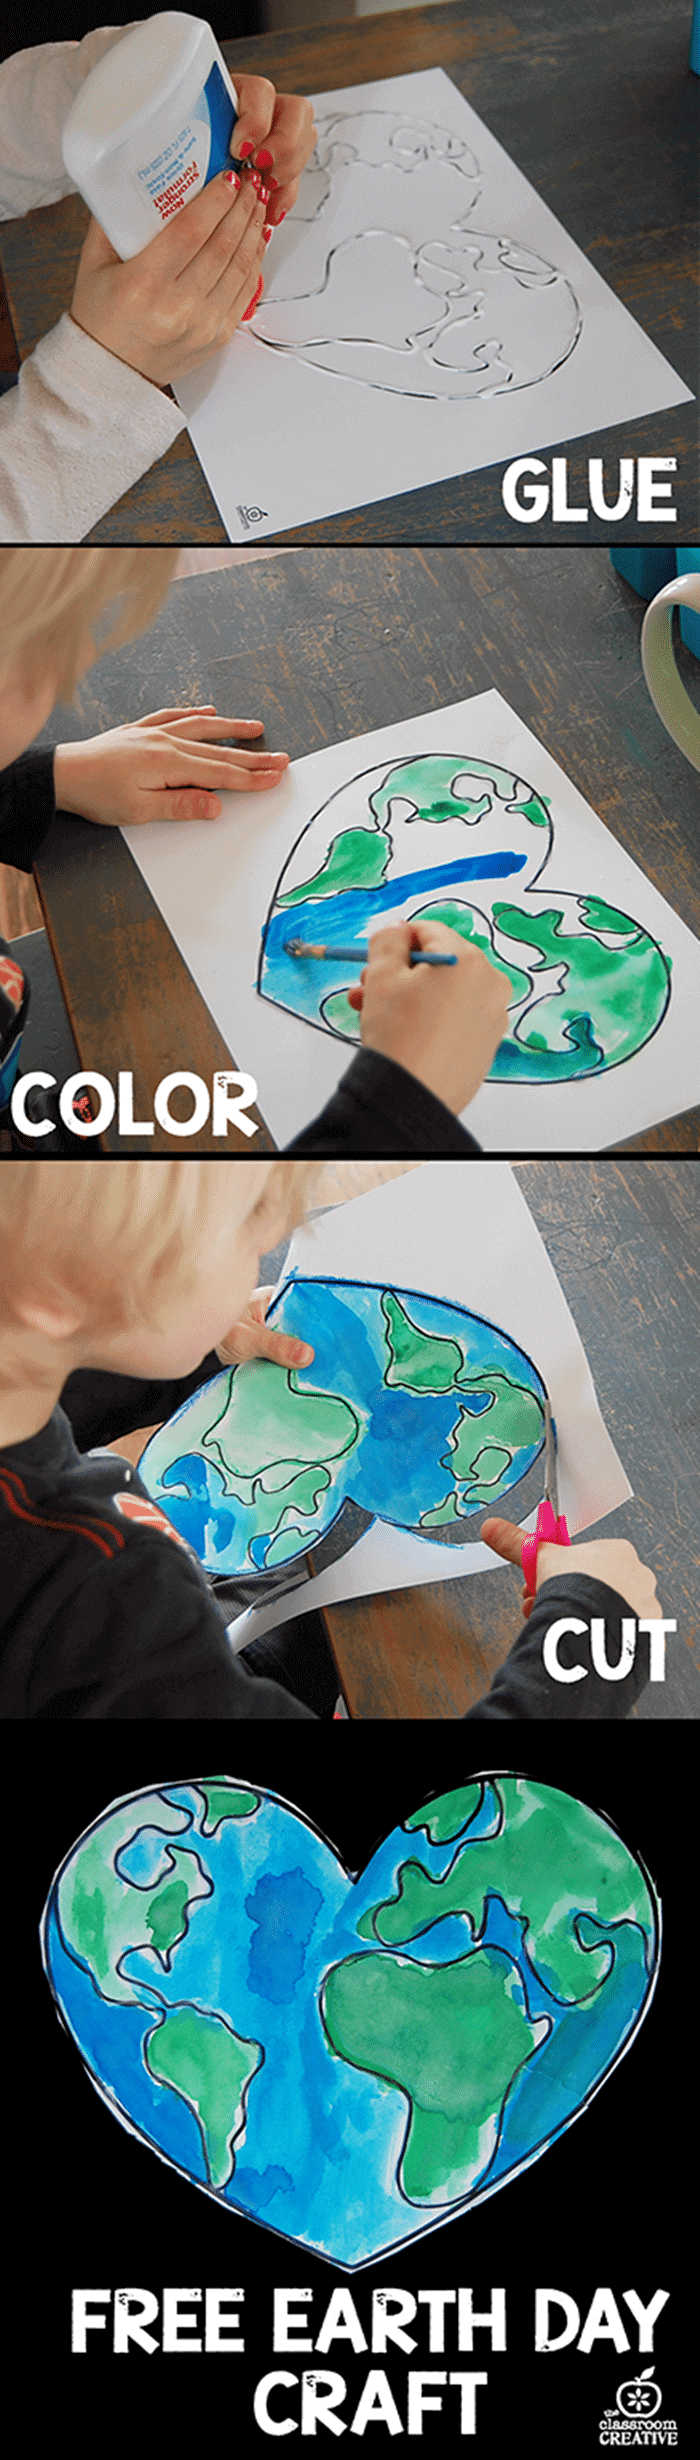 Free April Activities and Printable Resources - Earth Day craft heart